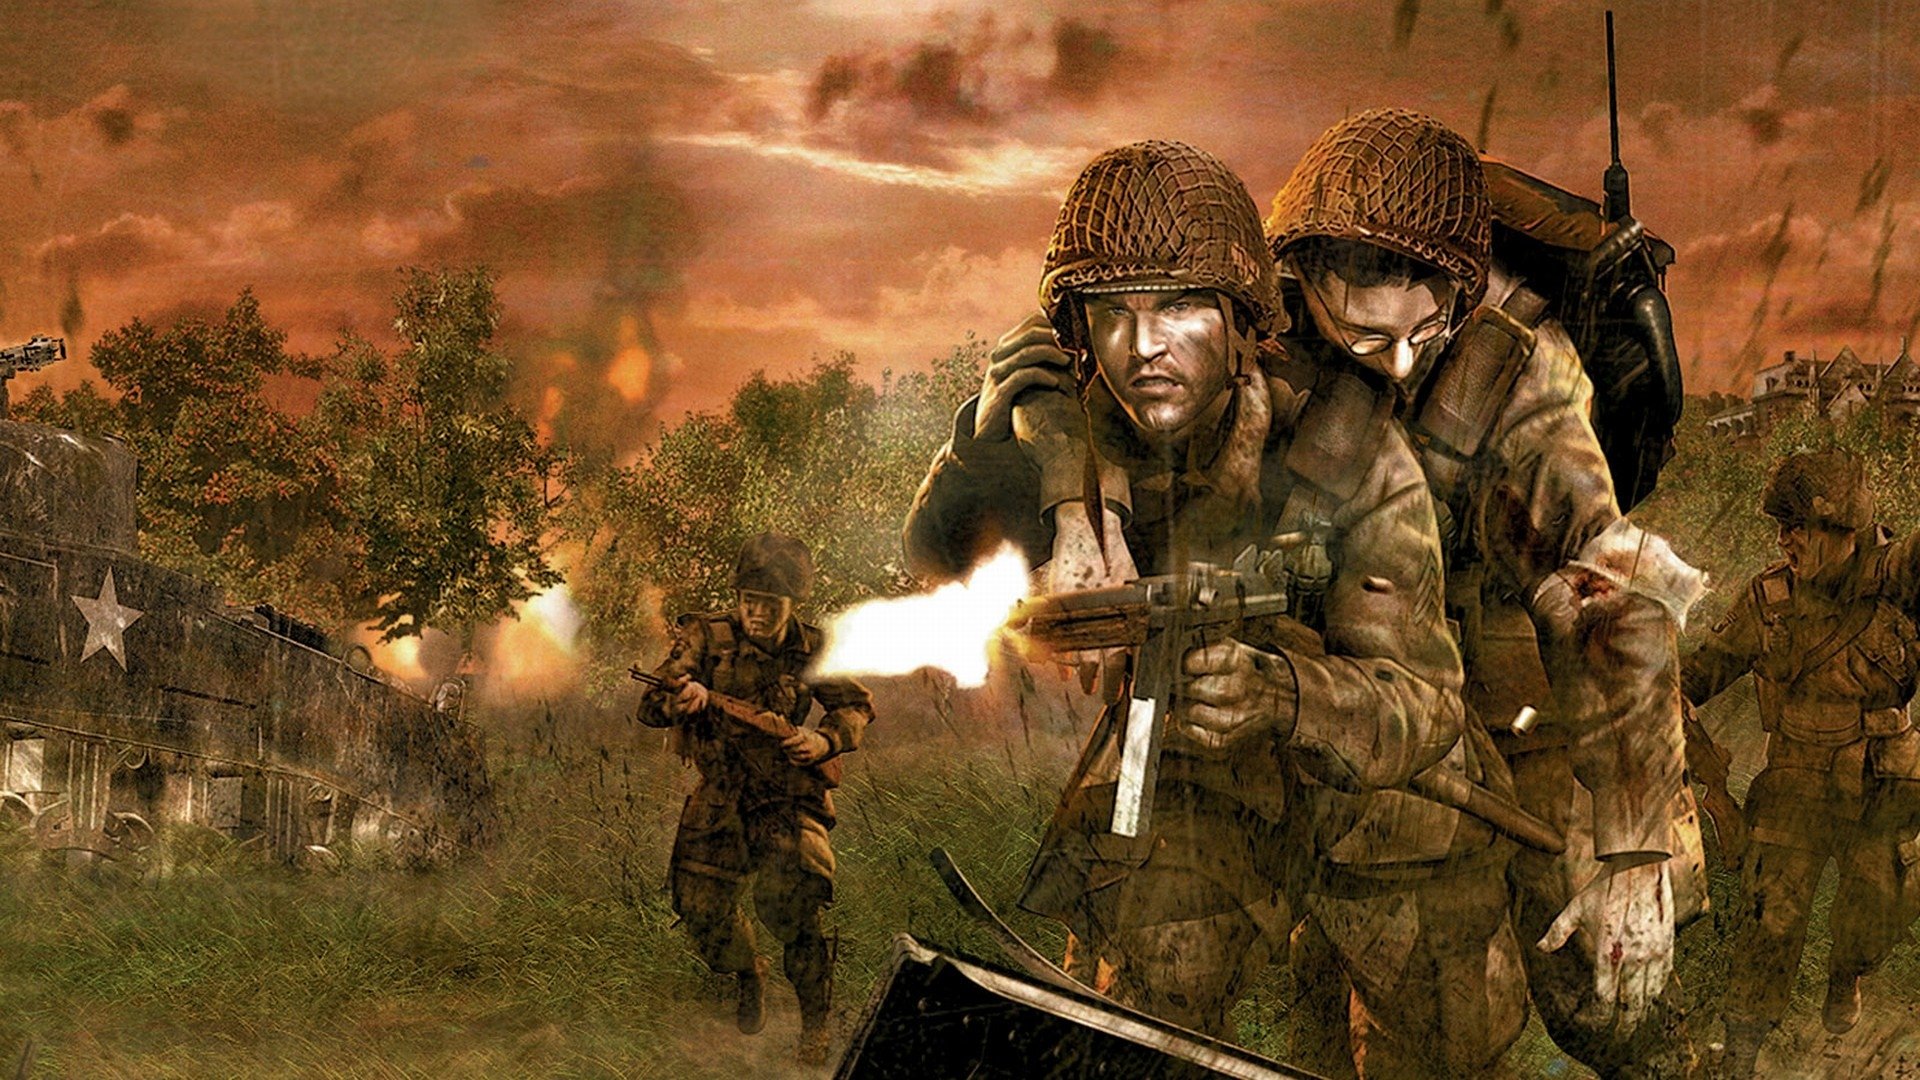 brothers in arms game